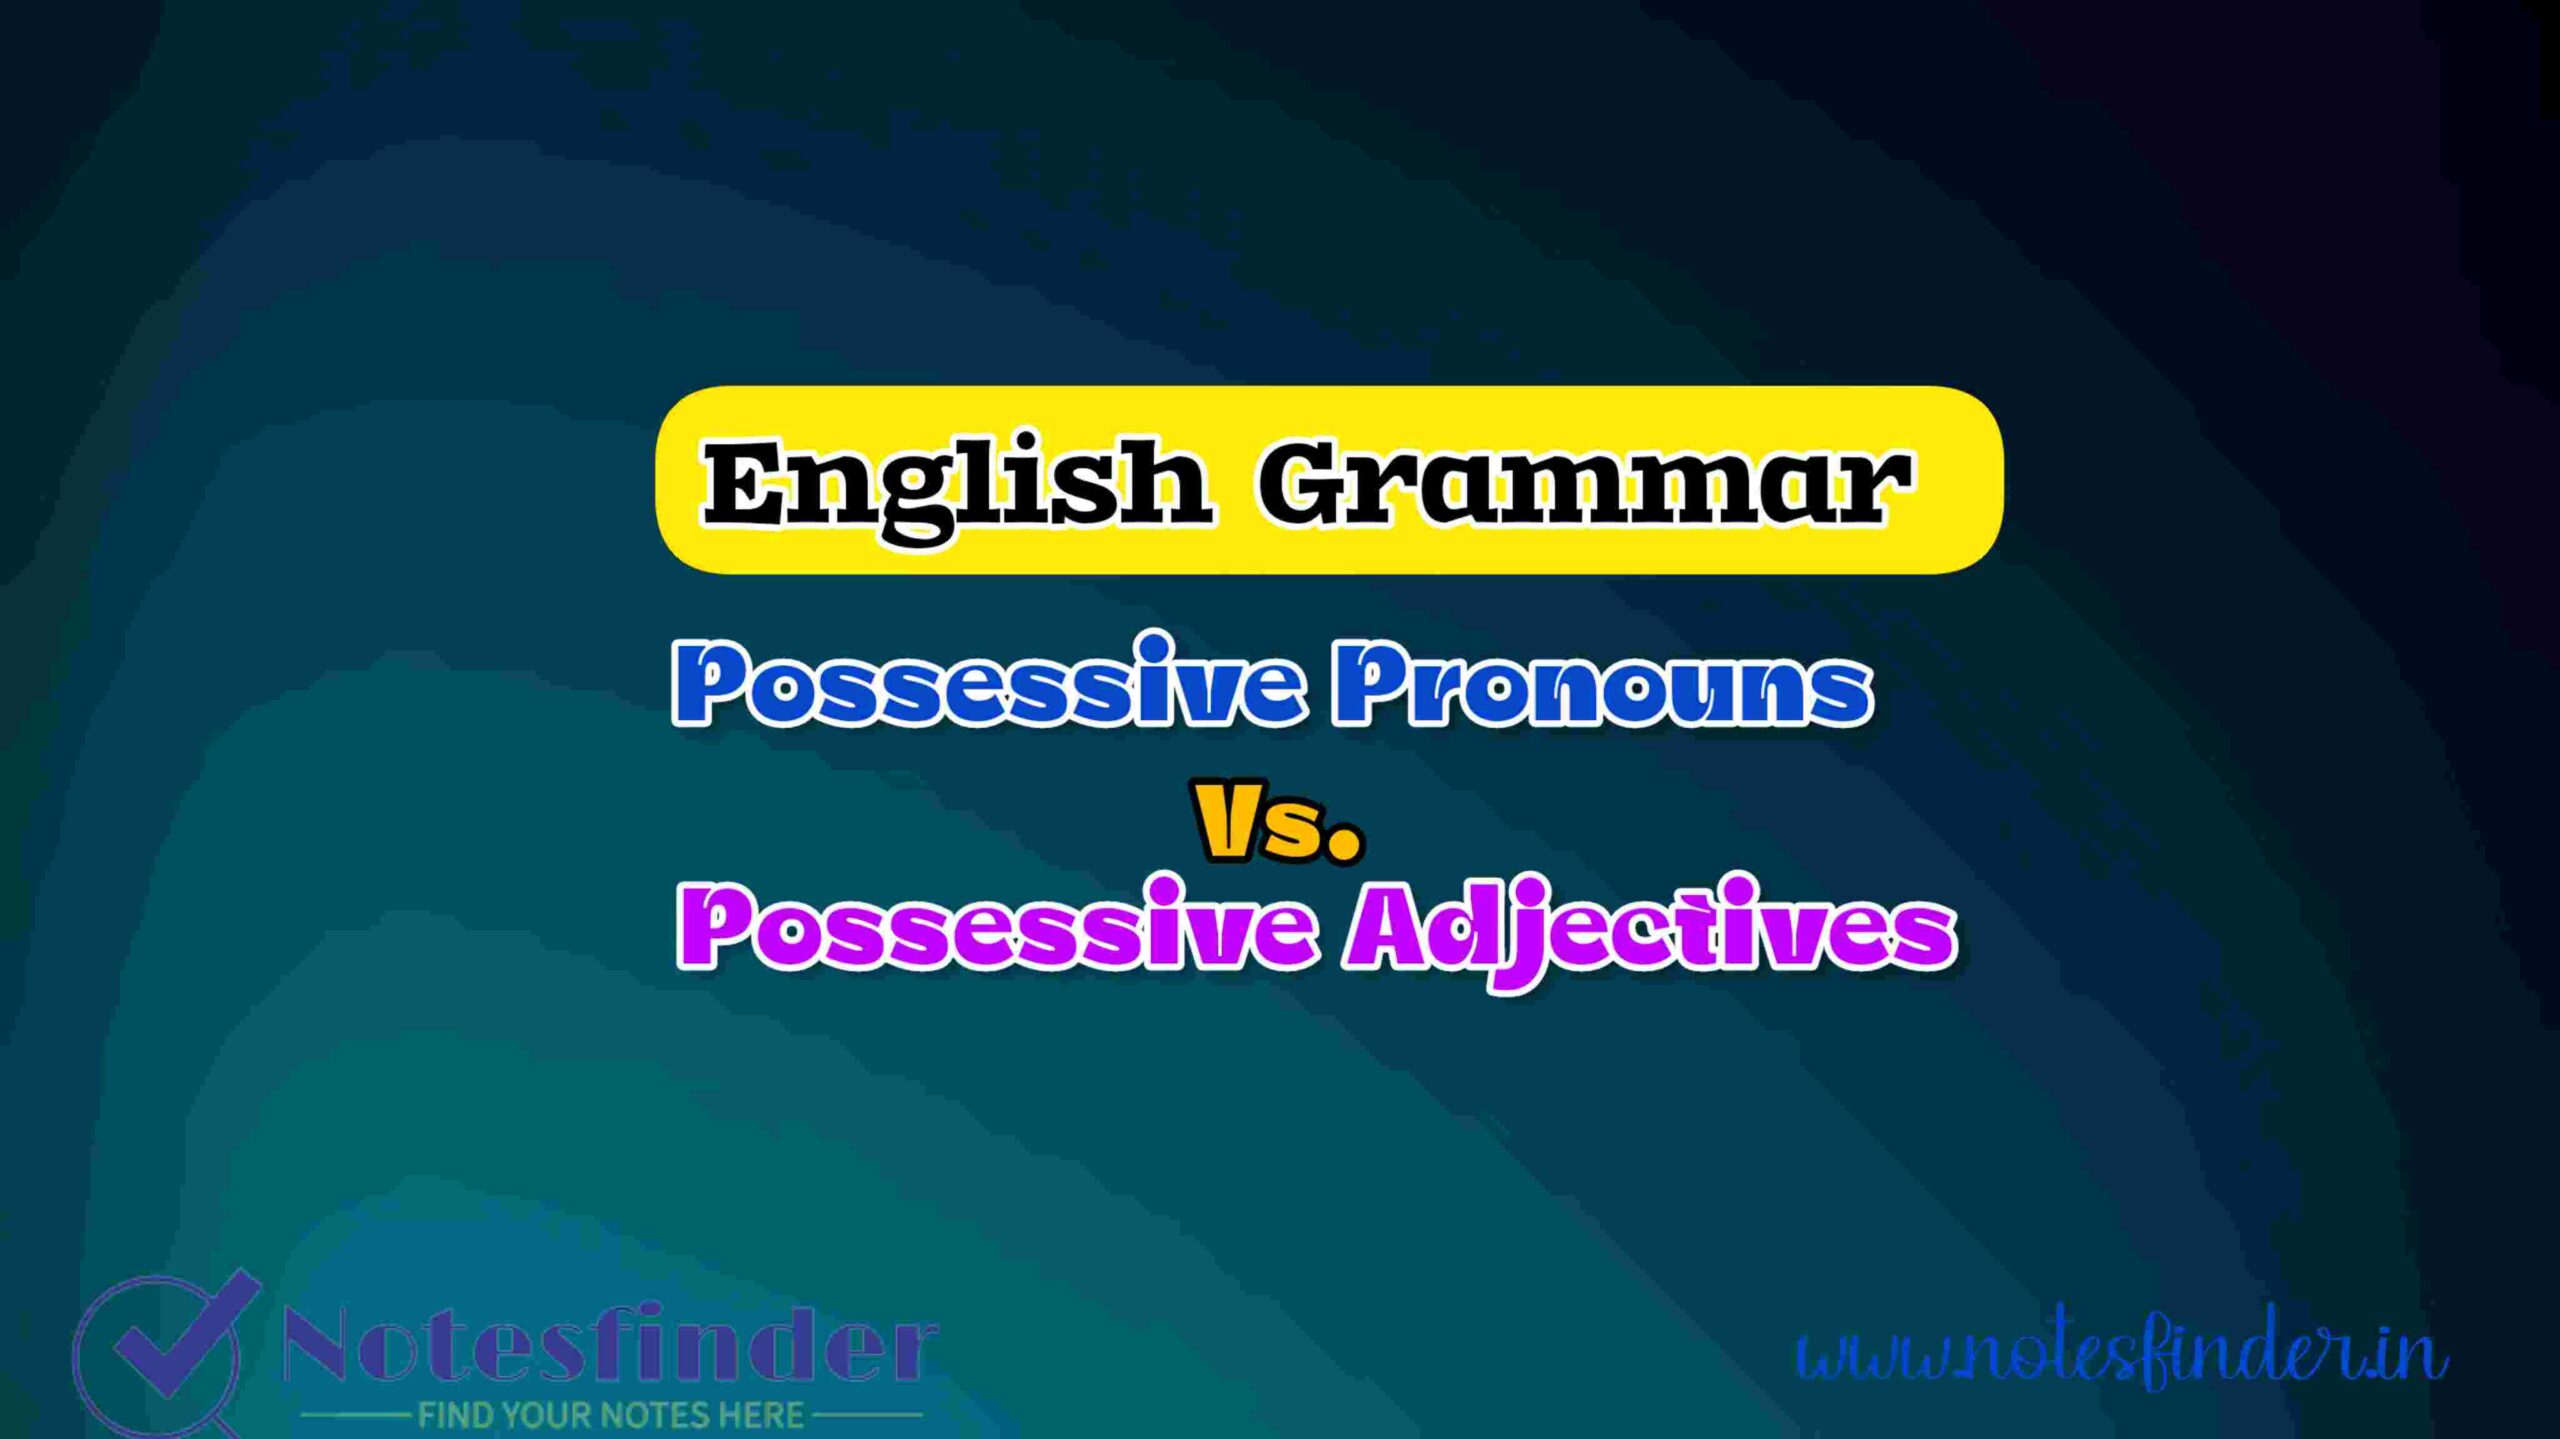 What Is The Difference Between Subject Object And Possessive Pronouns